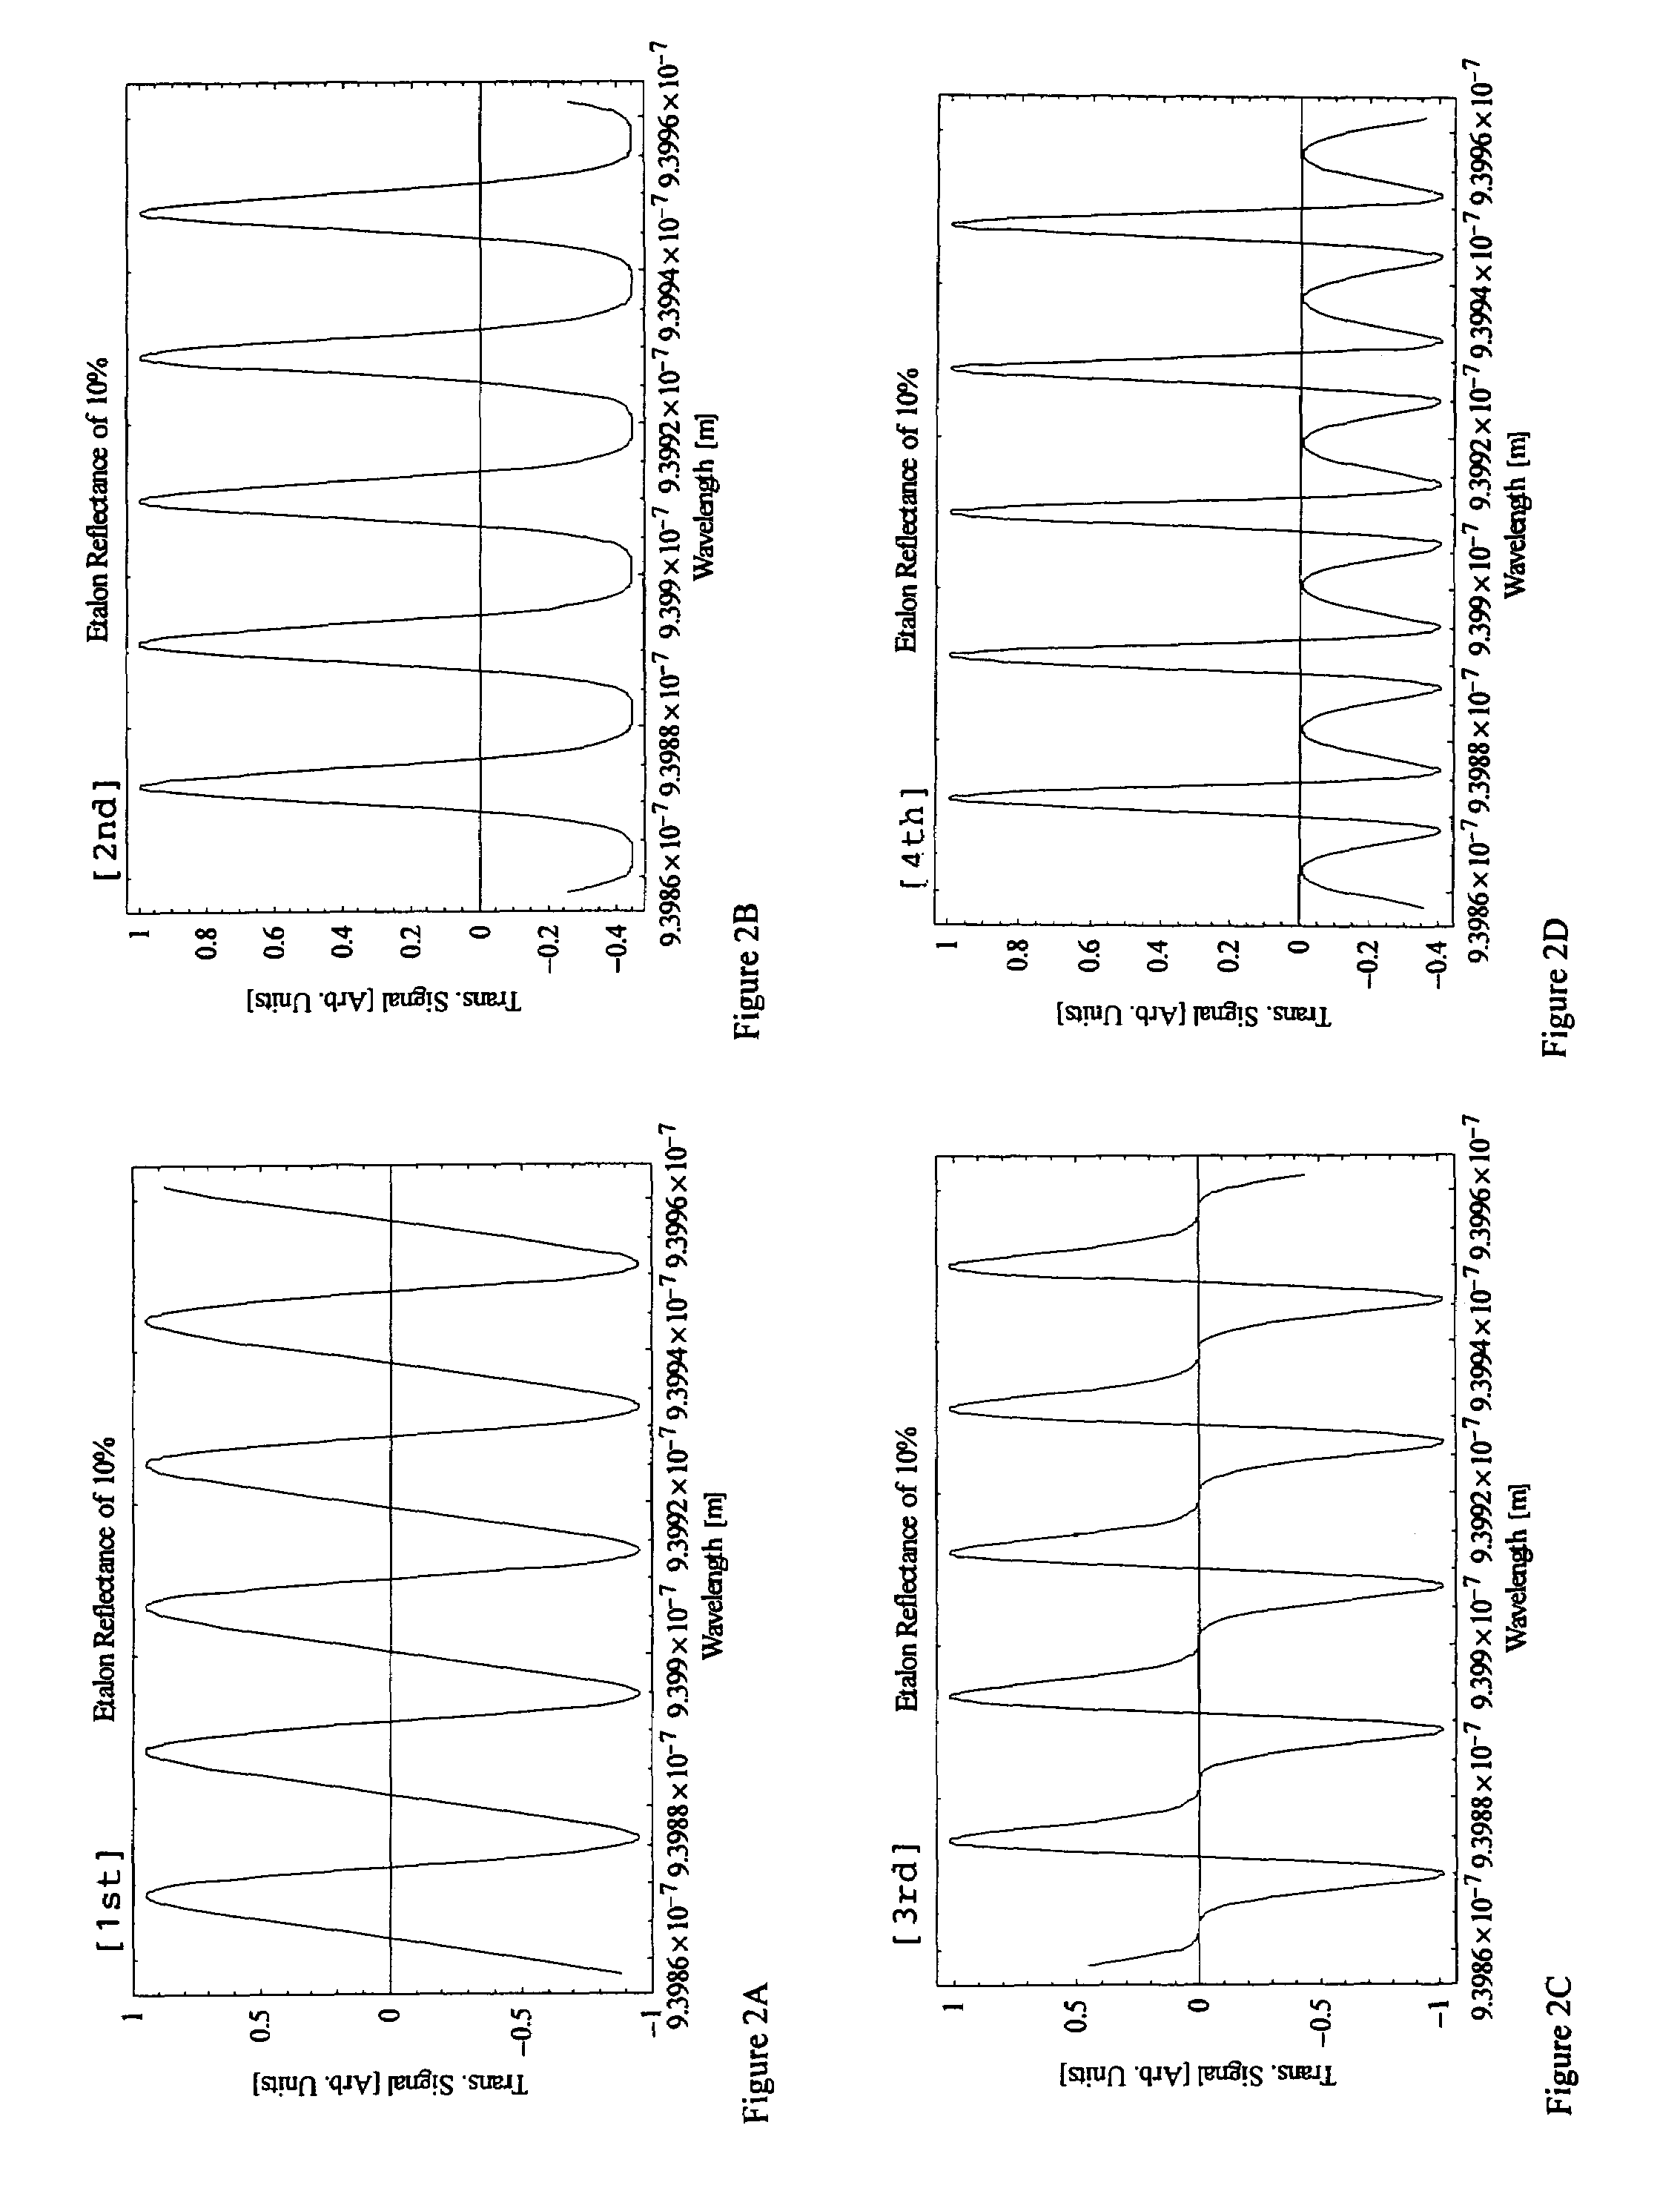 Device for optical monitoring of constituent in tissue or body fluid sample using wavelength modulation spectroscopy, such as for blood glucose levels